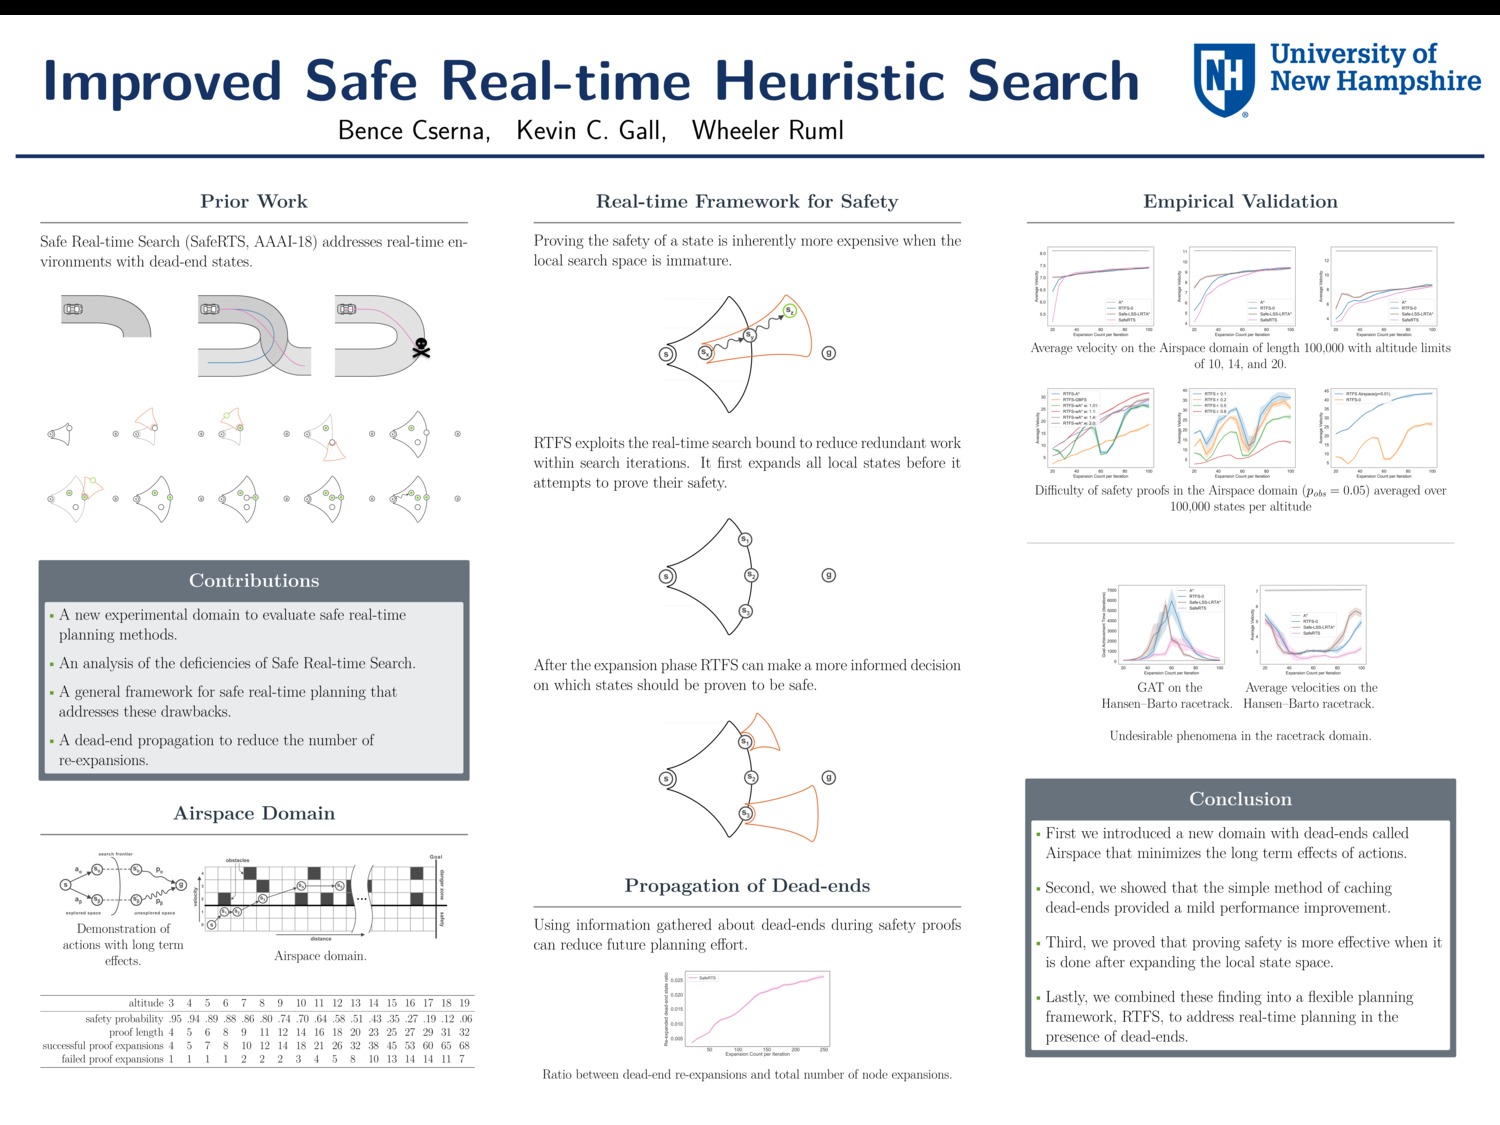 Improved Safe Real-Time Heuristic Search by ruml